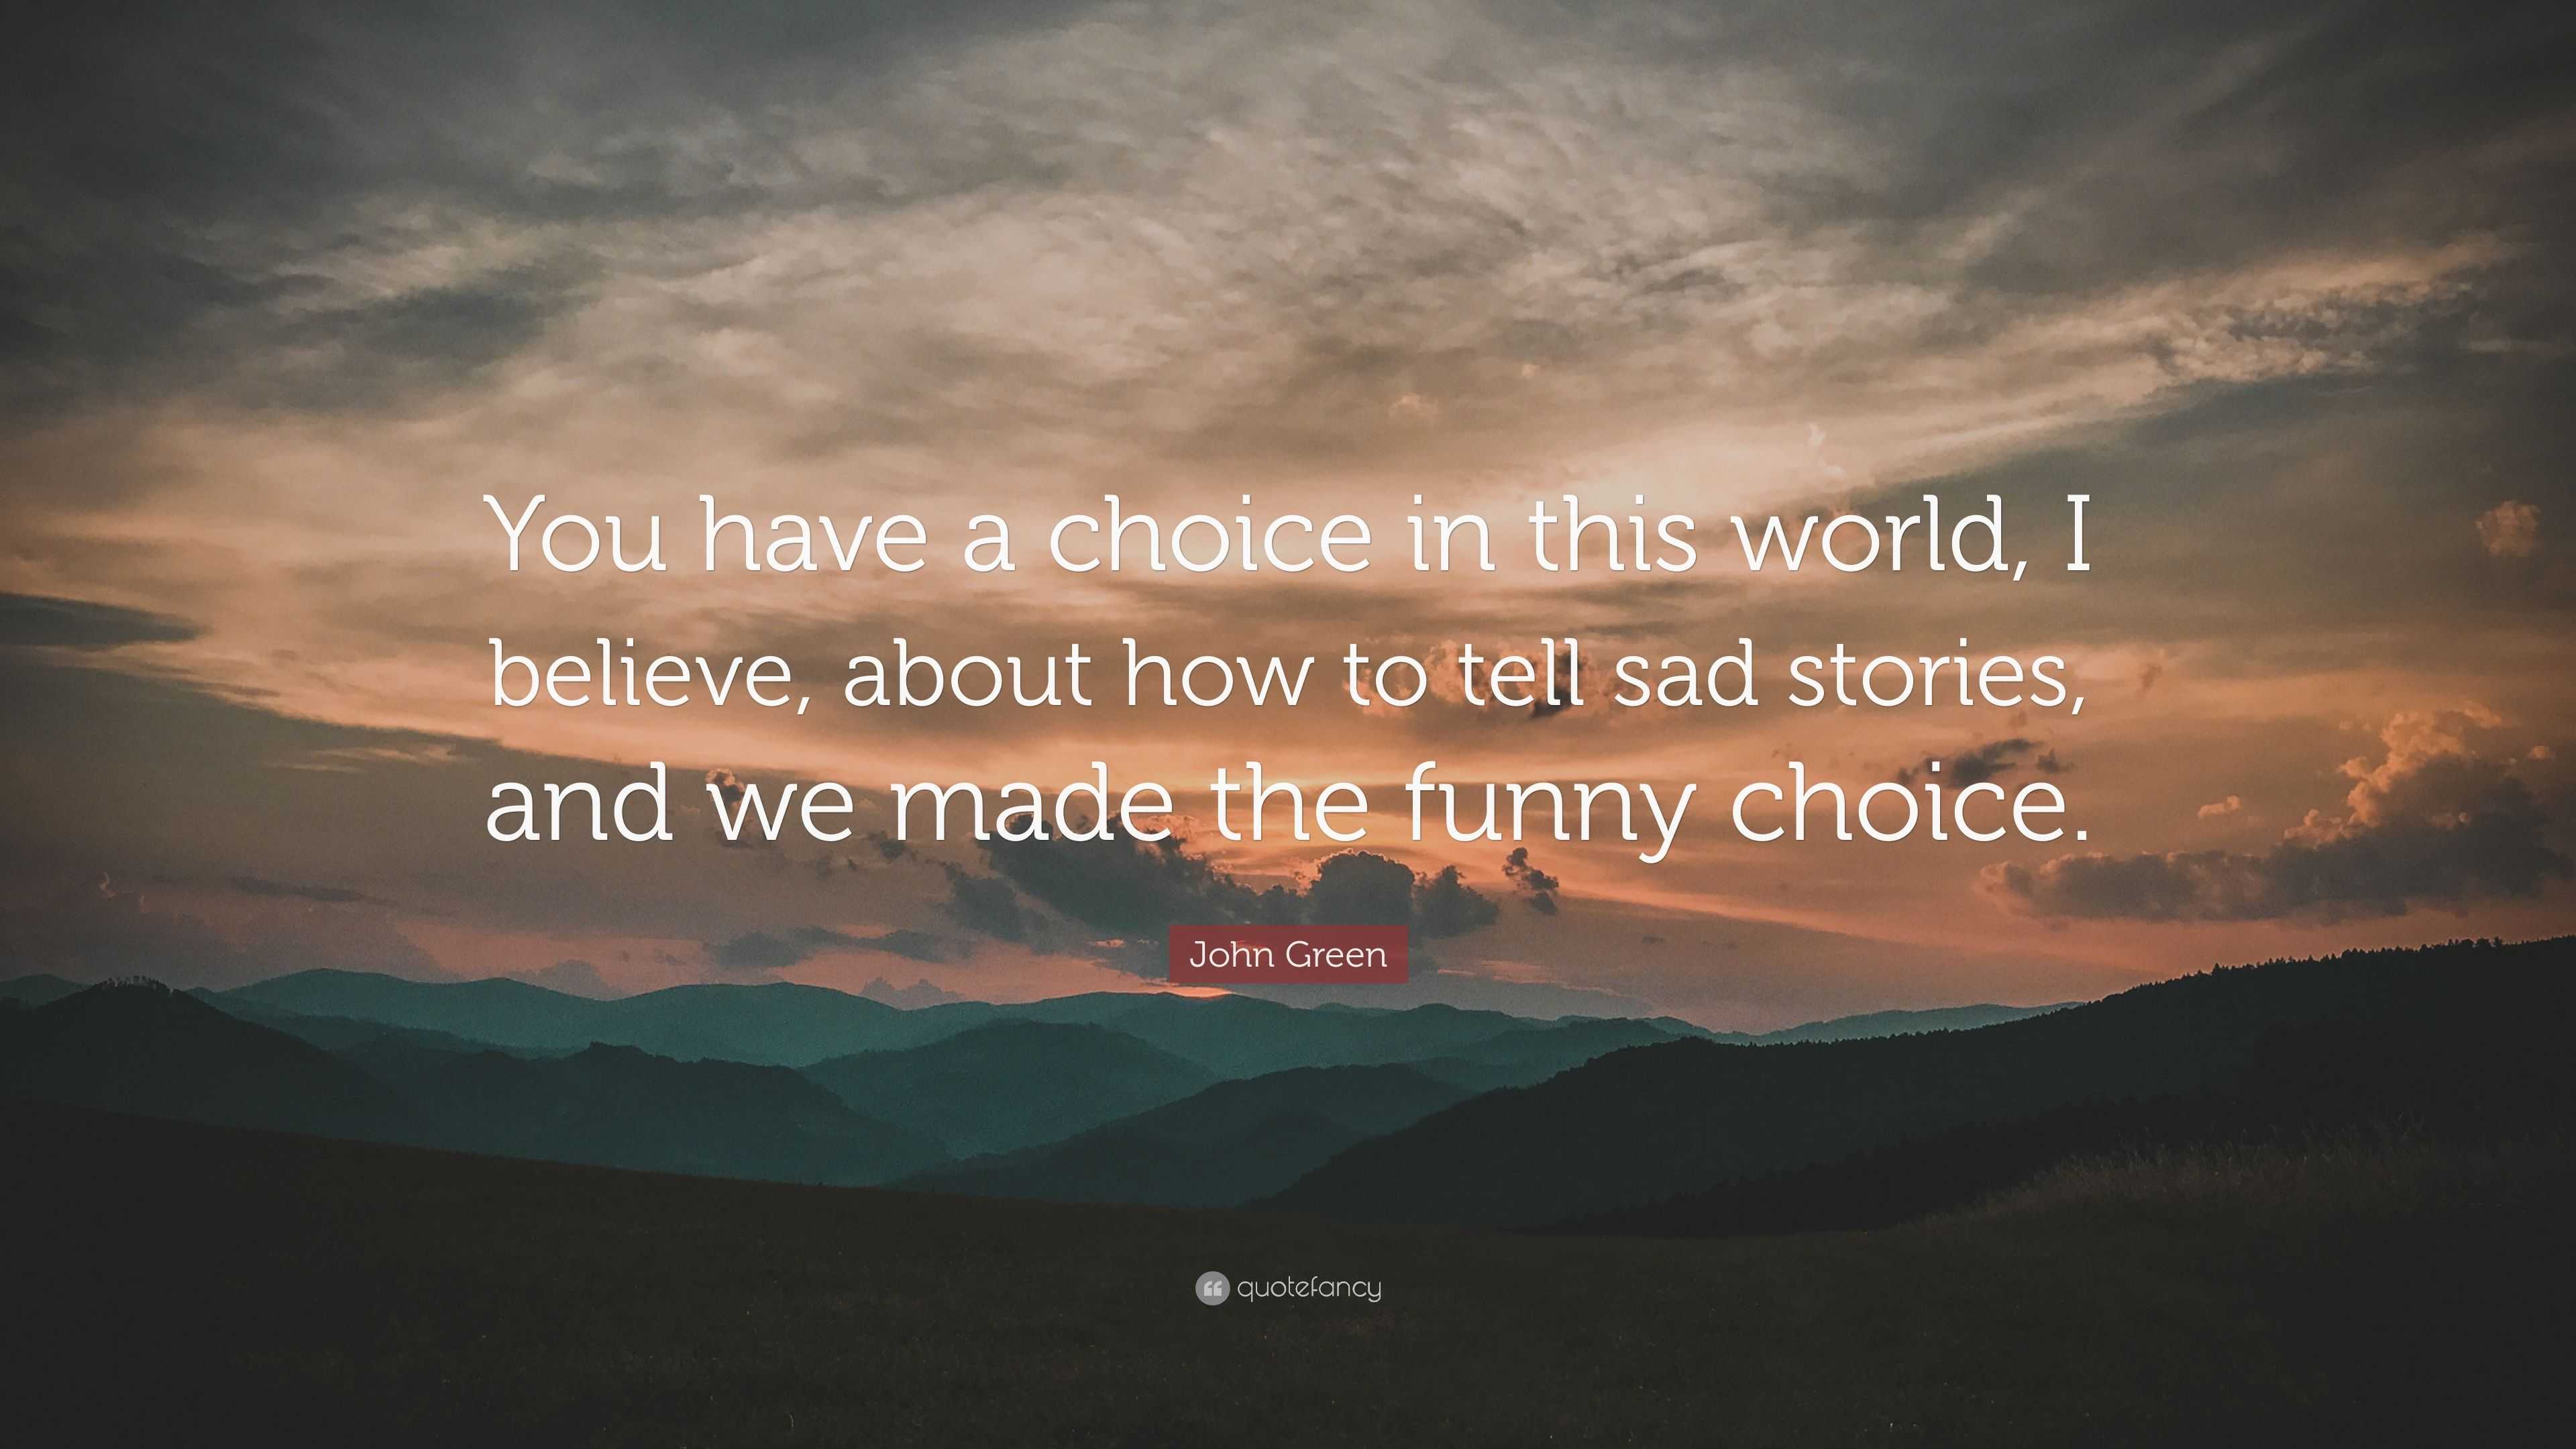 John Green Quote: “You have a choice in this world, I believe, about how to  tell